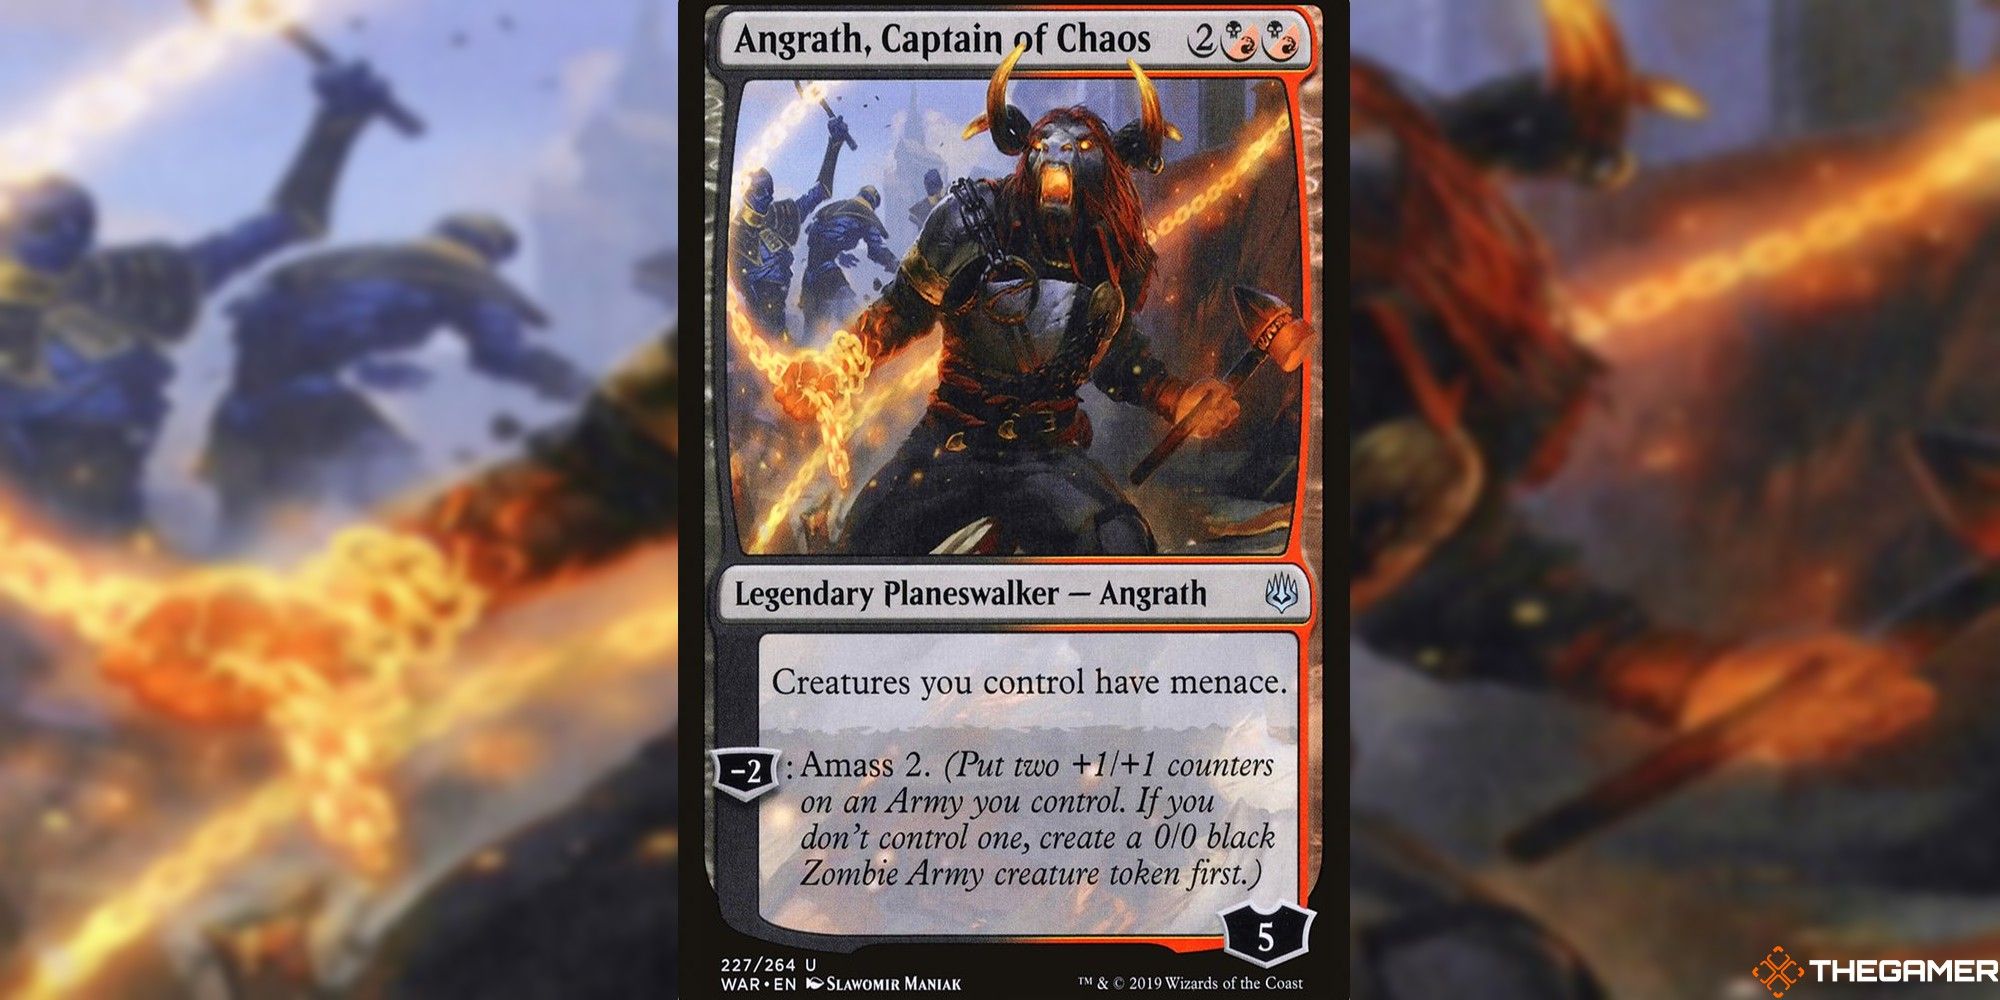 angrath, captain of chaos full card and art background